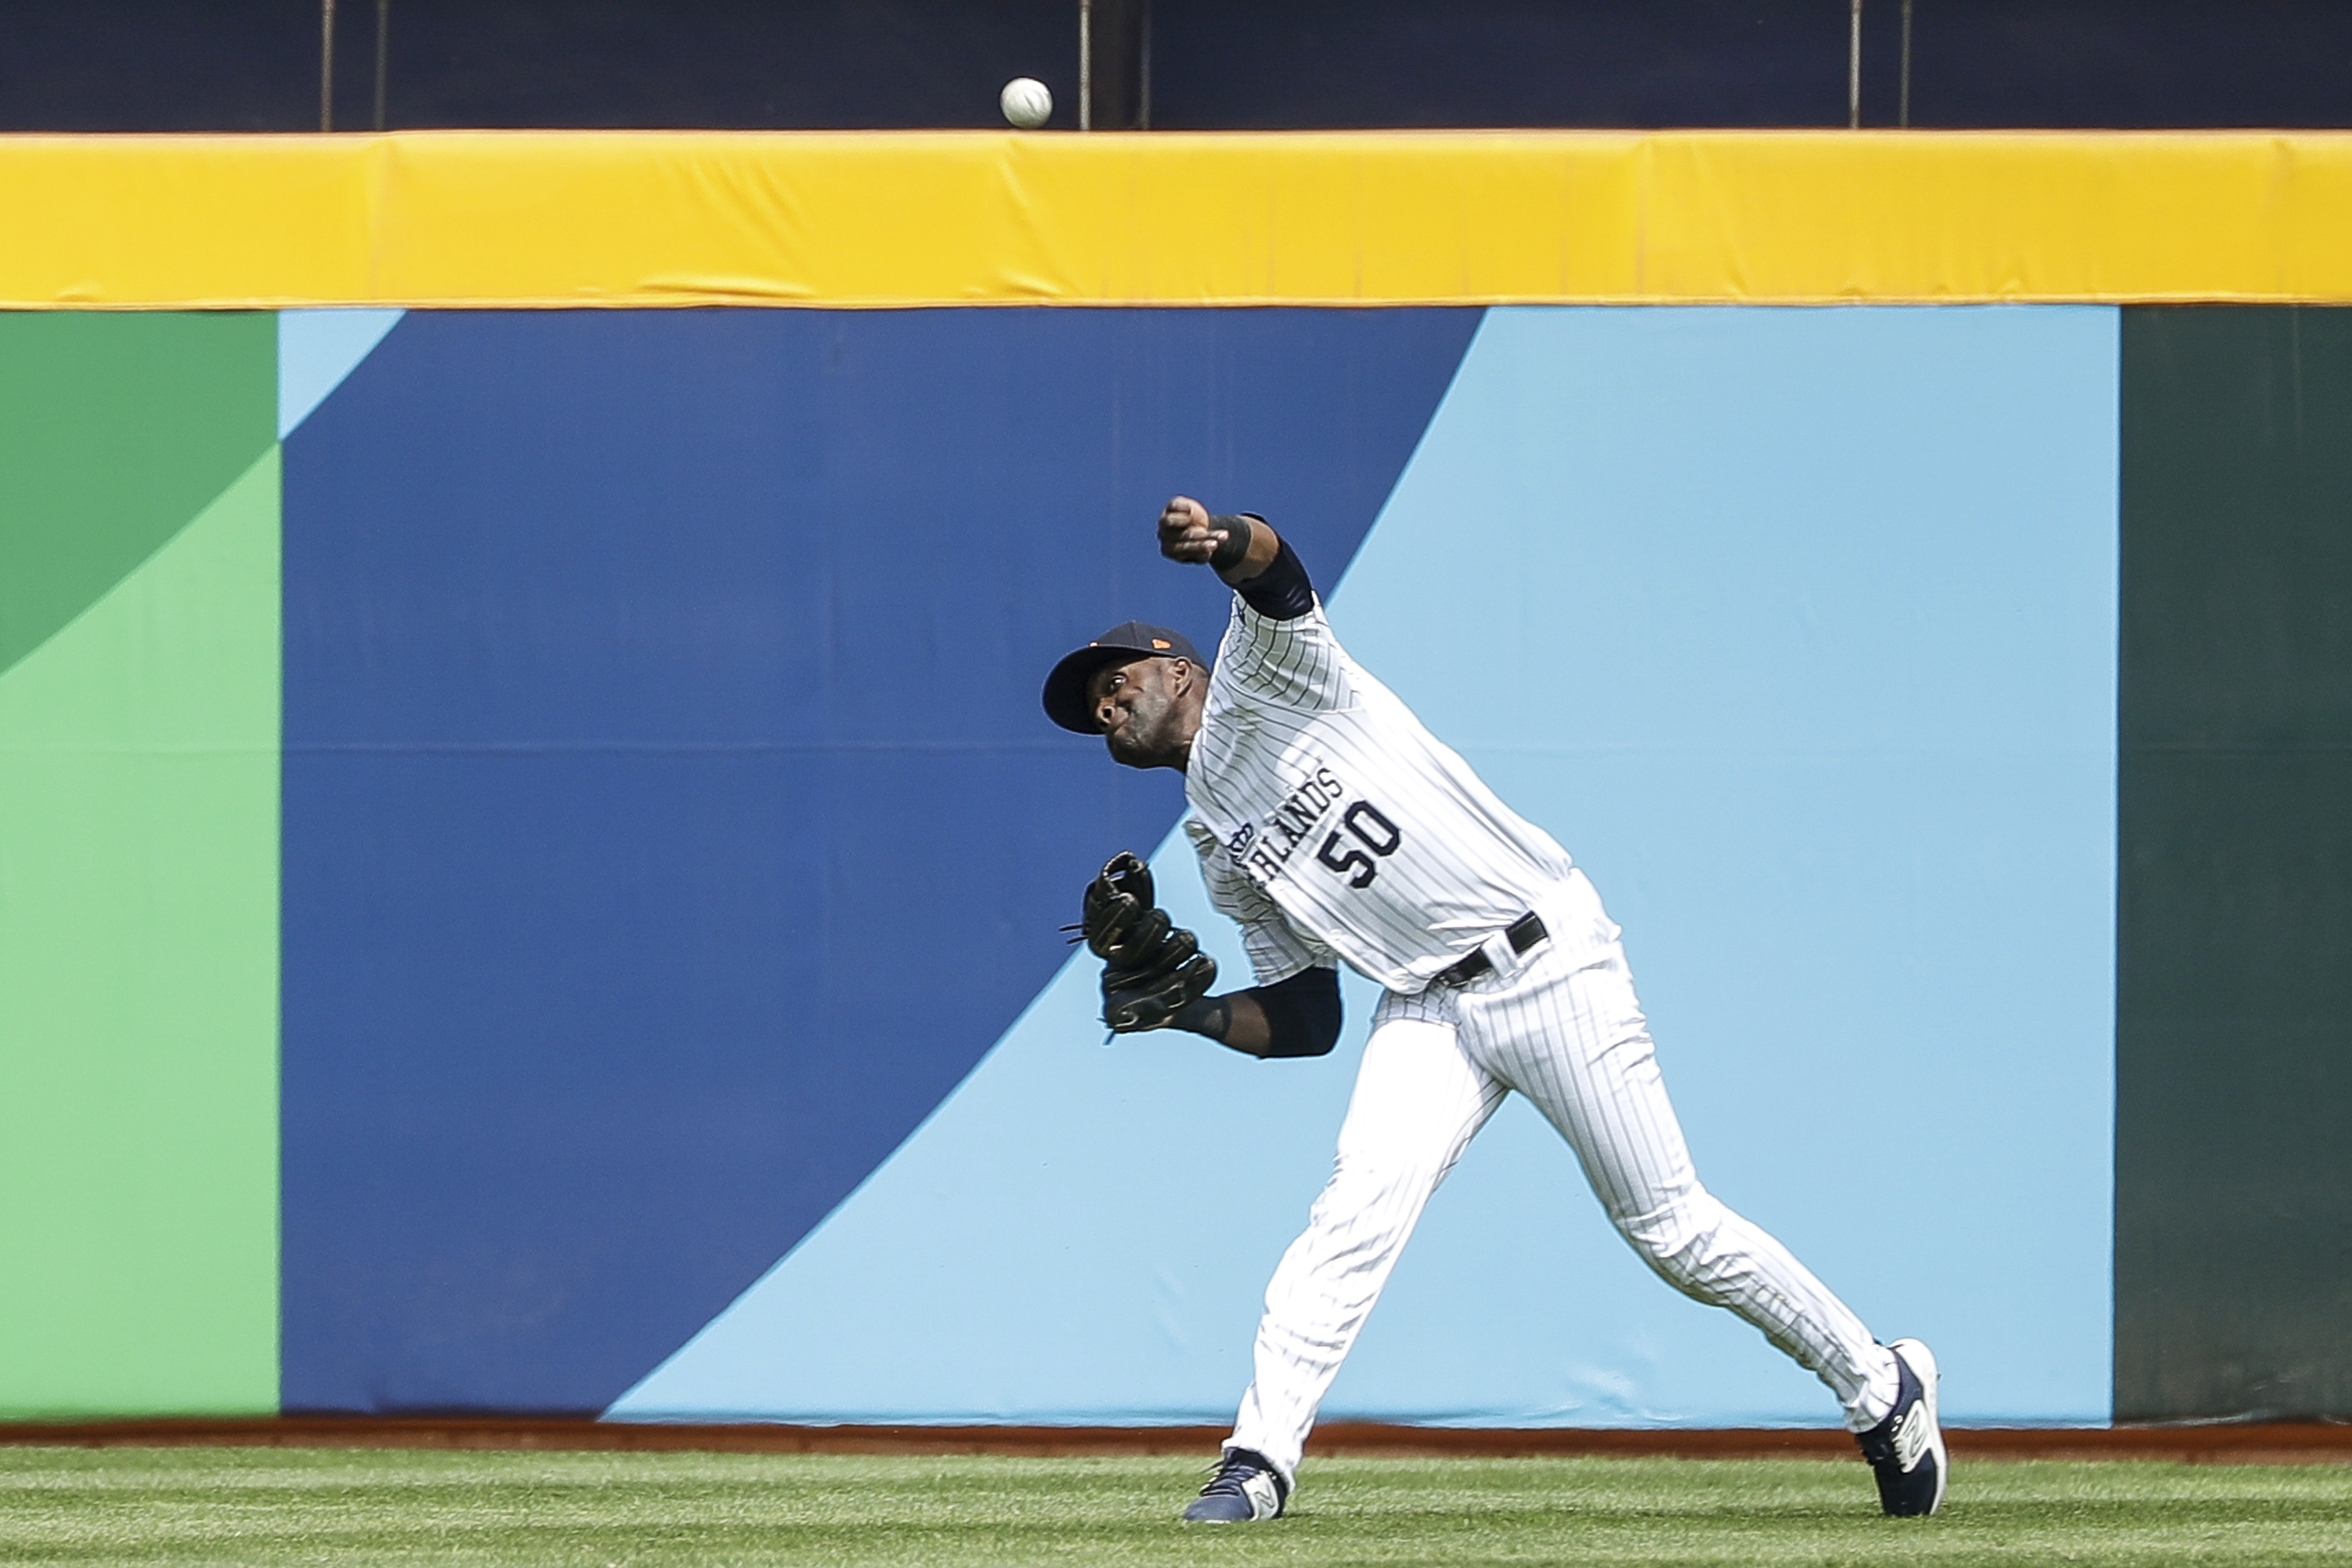 Dutch outfielder Roger Bernadina throws the ball during a World Baseball Classic Group A match against Panama, at Taichung Intercontinental Stadium, in Taichung, Taiwan, on March 9, 2023. (AP Photo/I-Hwa Cheng)